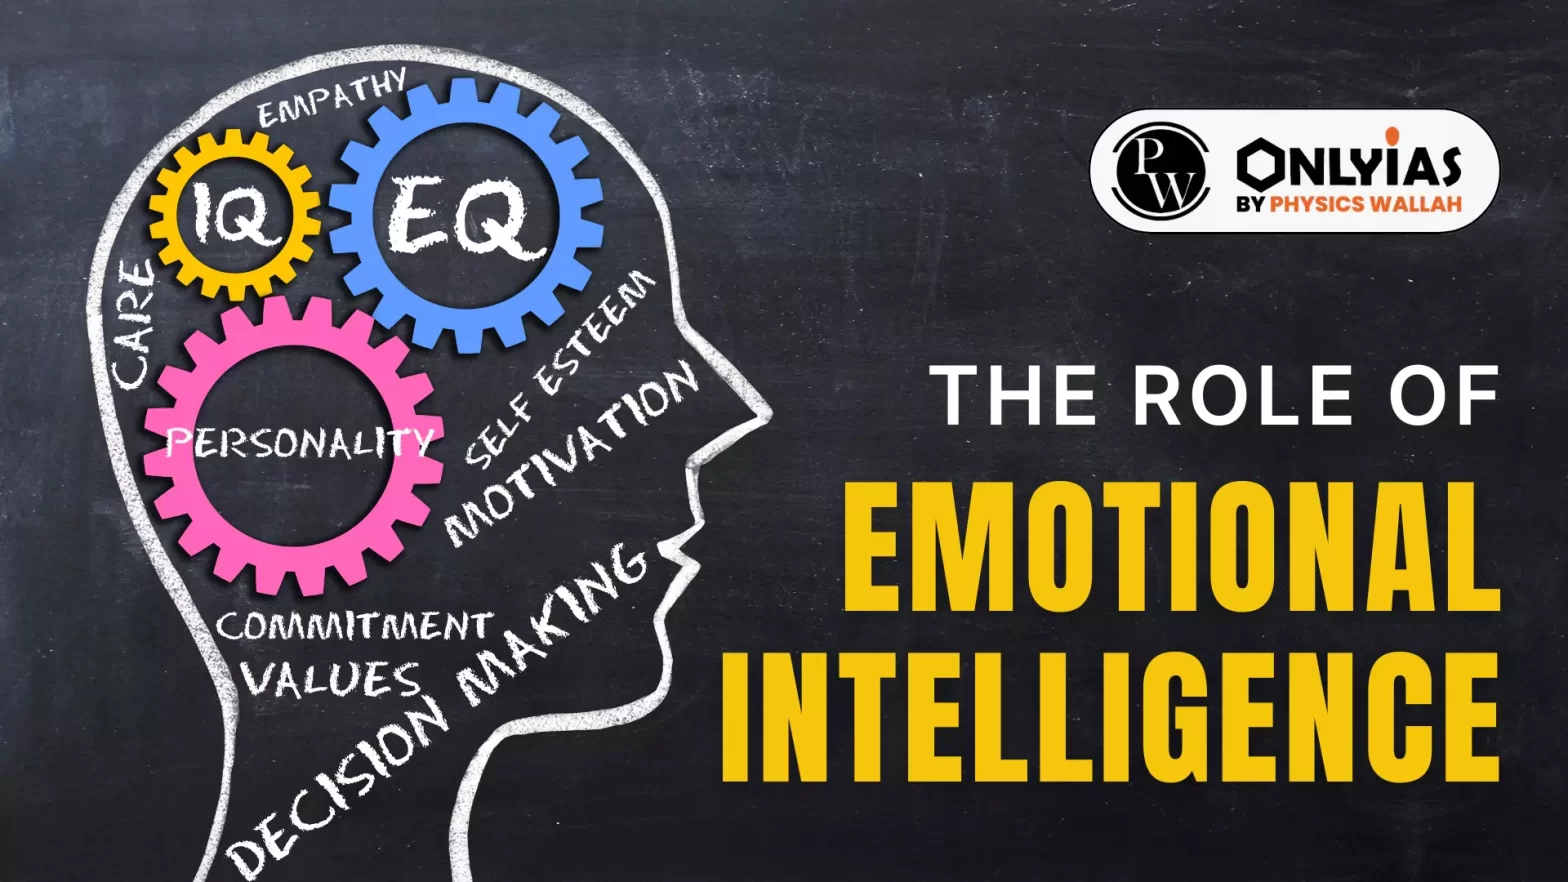 The Role of Emotional Intelligence